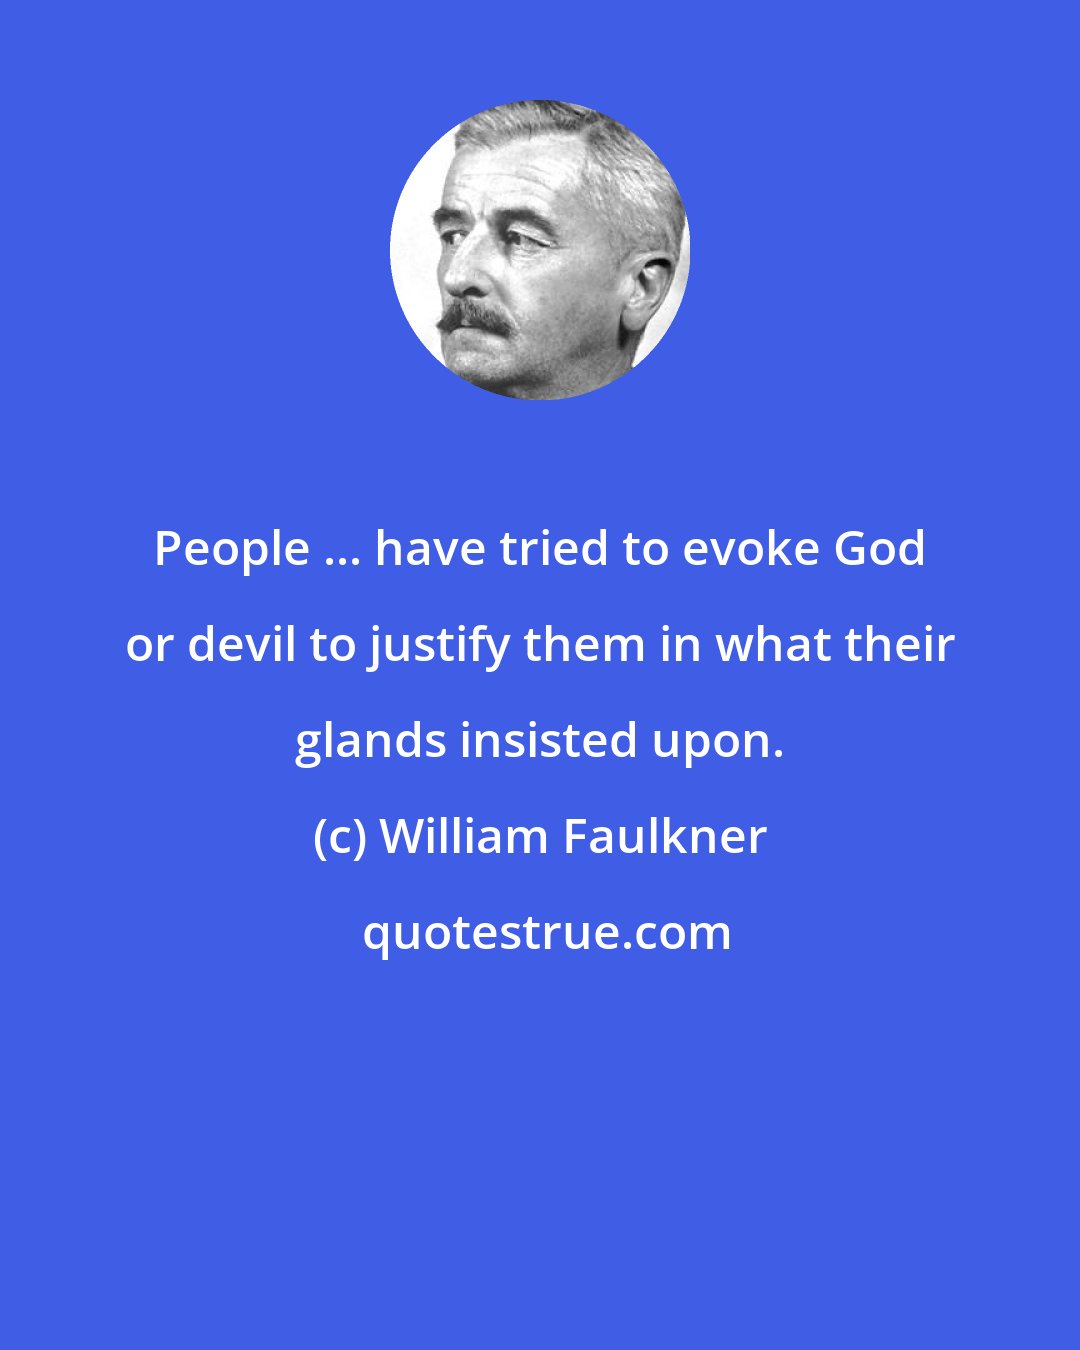 William Faulkner: People ... have tried to evoke God or devil to justify them in what their glands insisted upon.